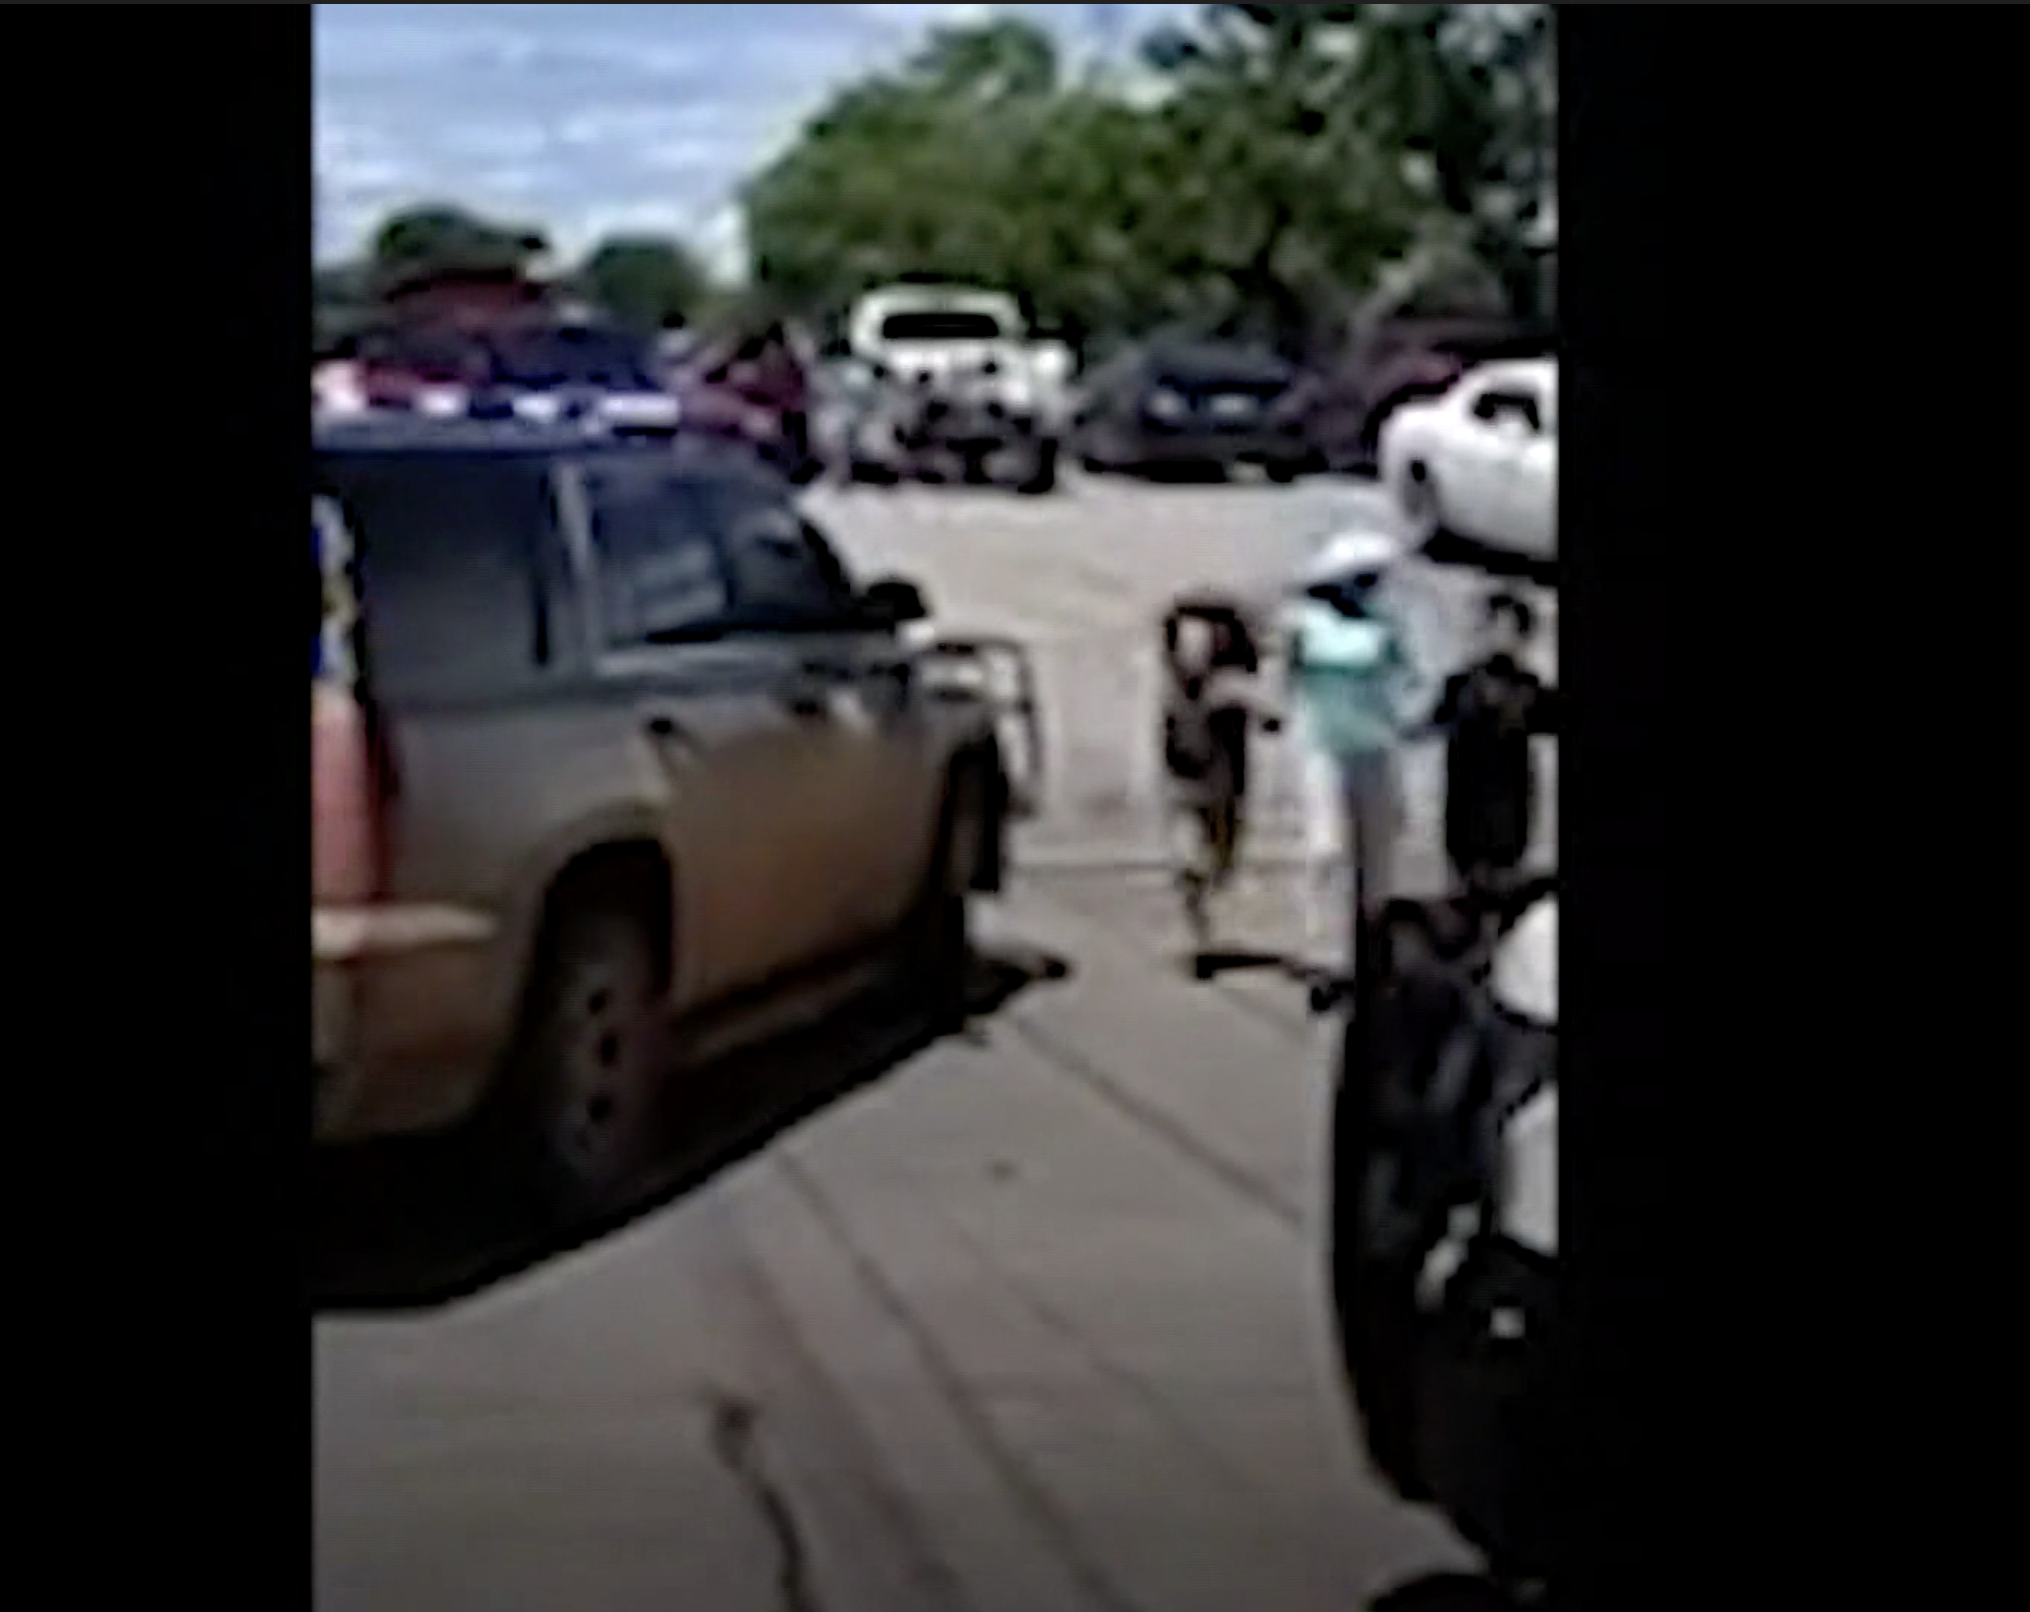 Screenshot of someone wearing a hat and holding two children&#x27;s hands near cars in a parking lot